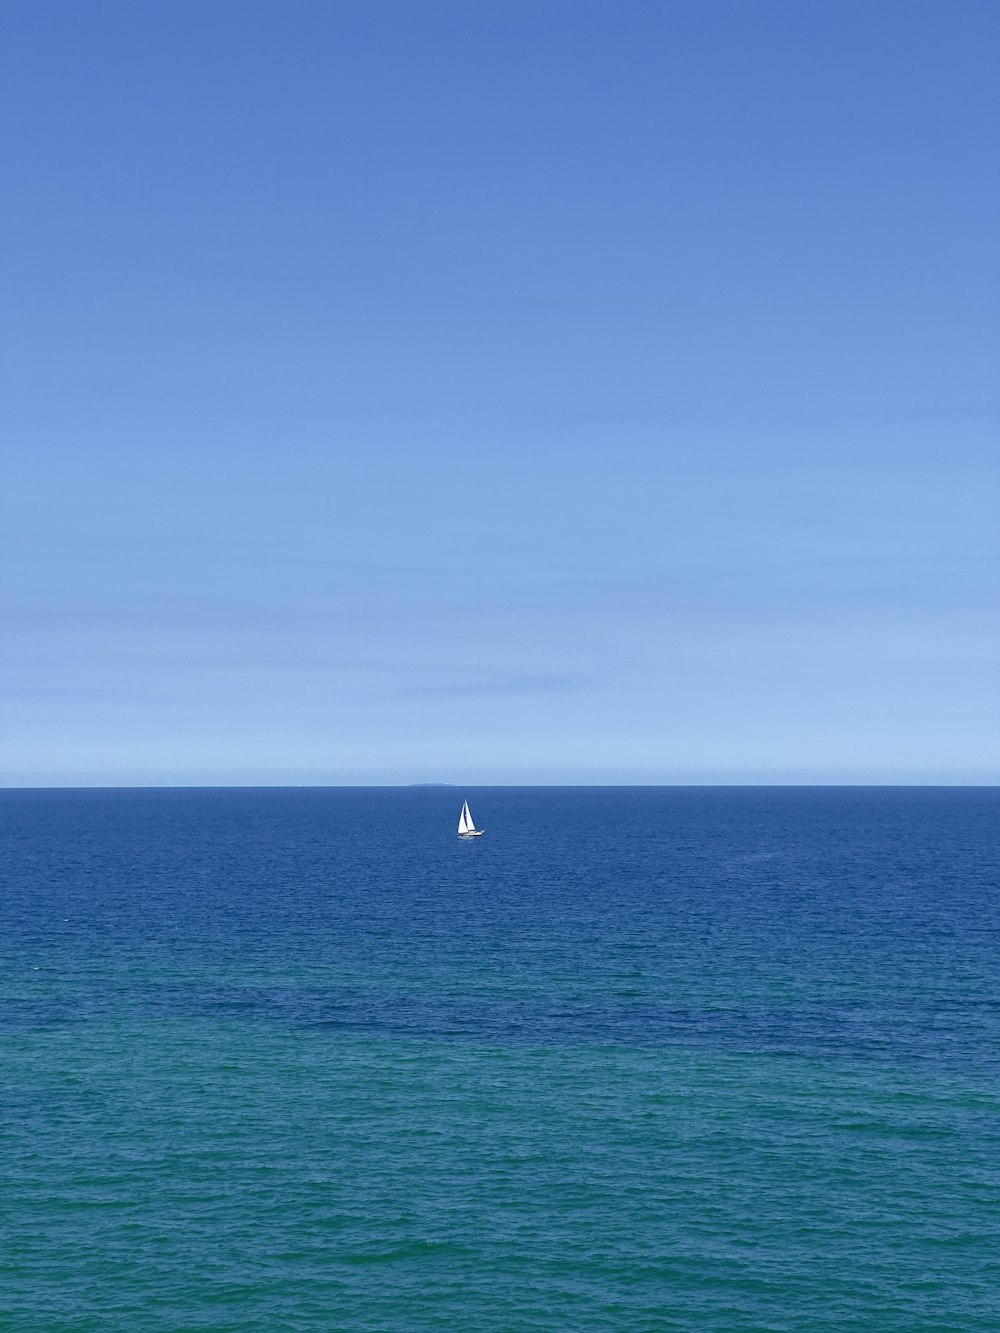 white sailboat on blue sea under blue sky during daytime